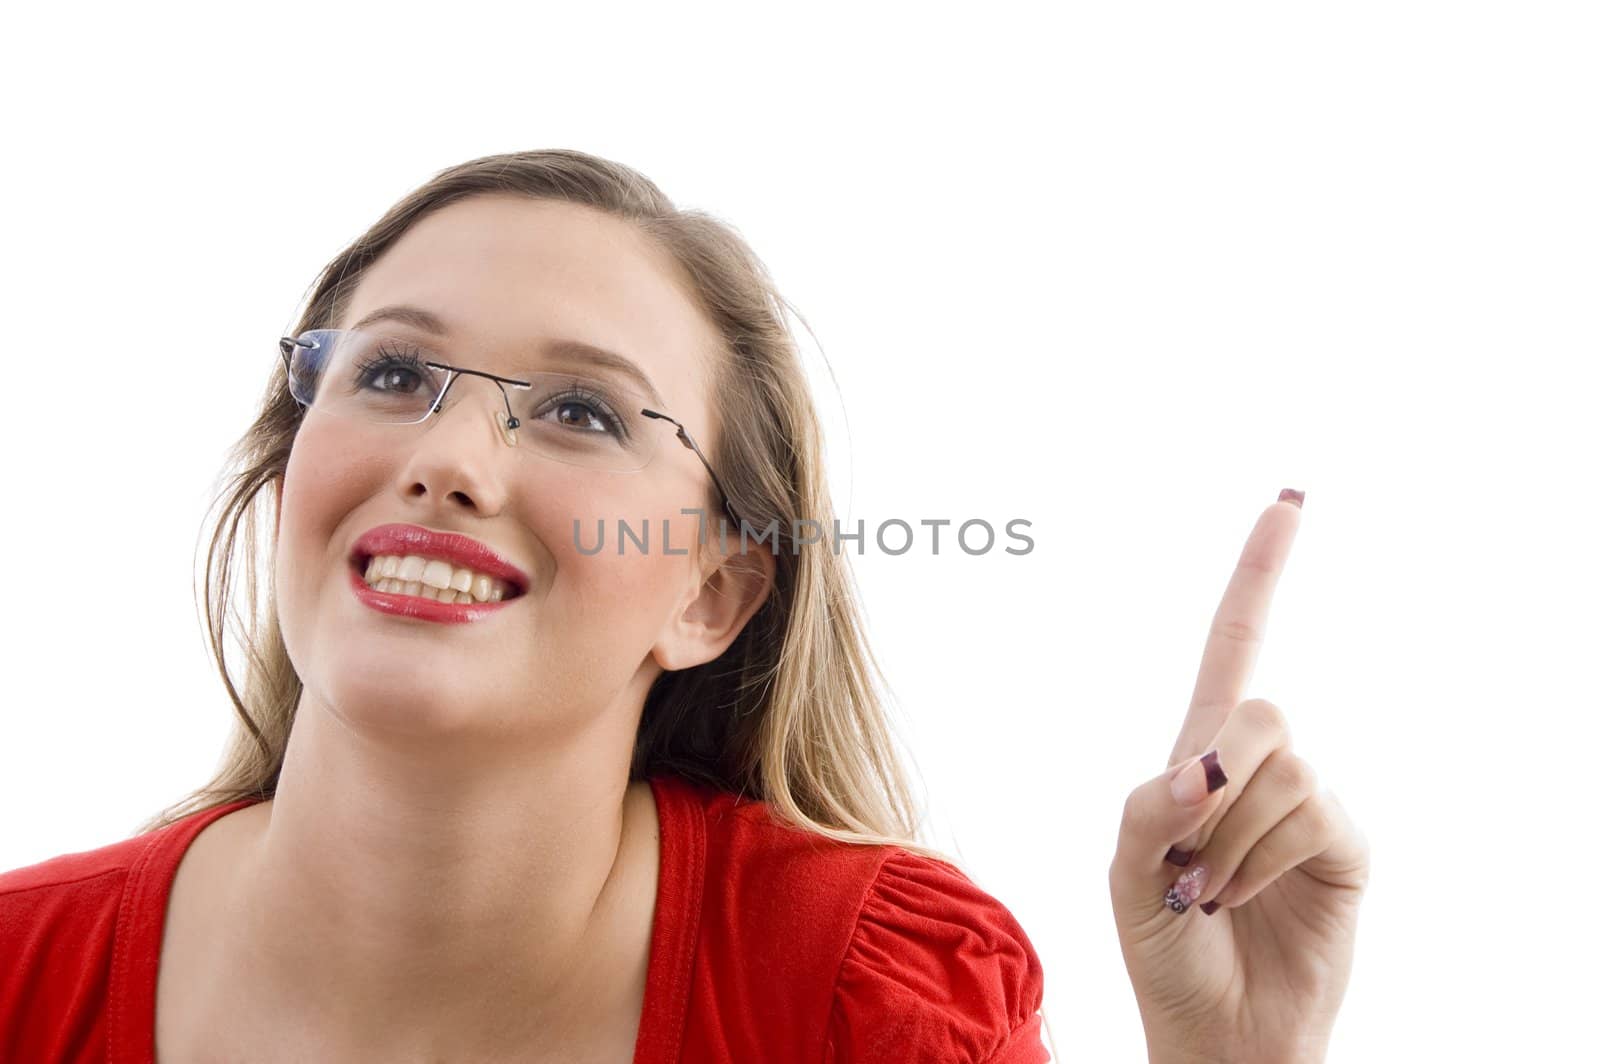 caucasian model smiling and pointing upwards against white background